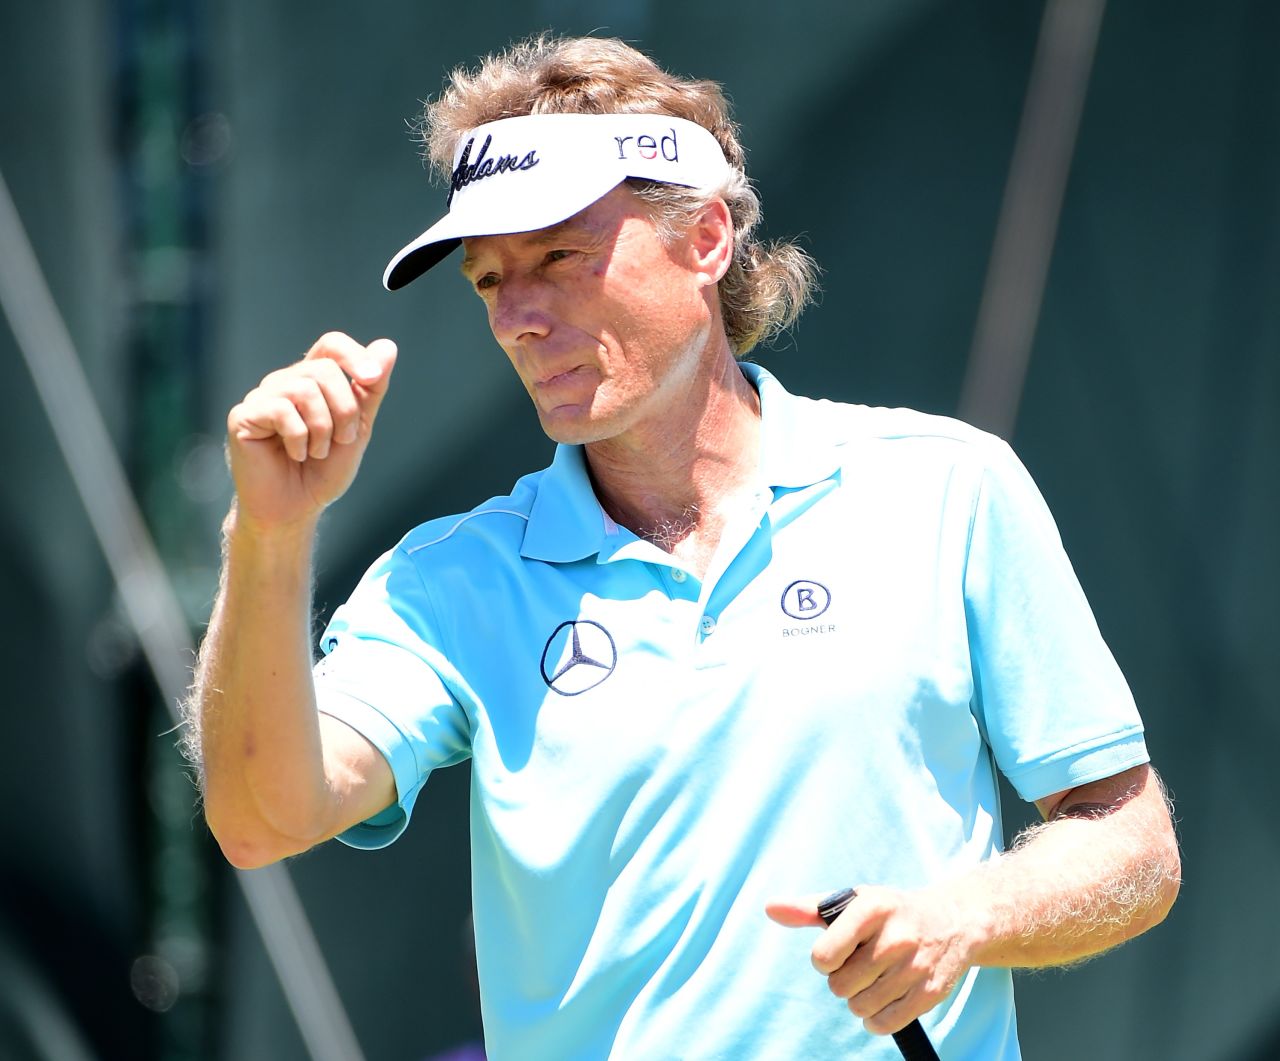 Bernhard Langer will this week tee off at The Open, an event at which he has twice been runner-up, for what could be the last time.